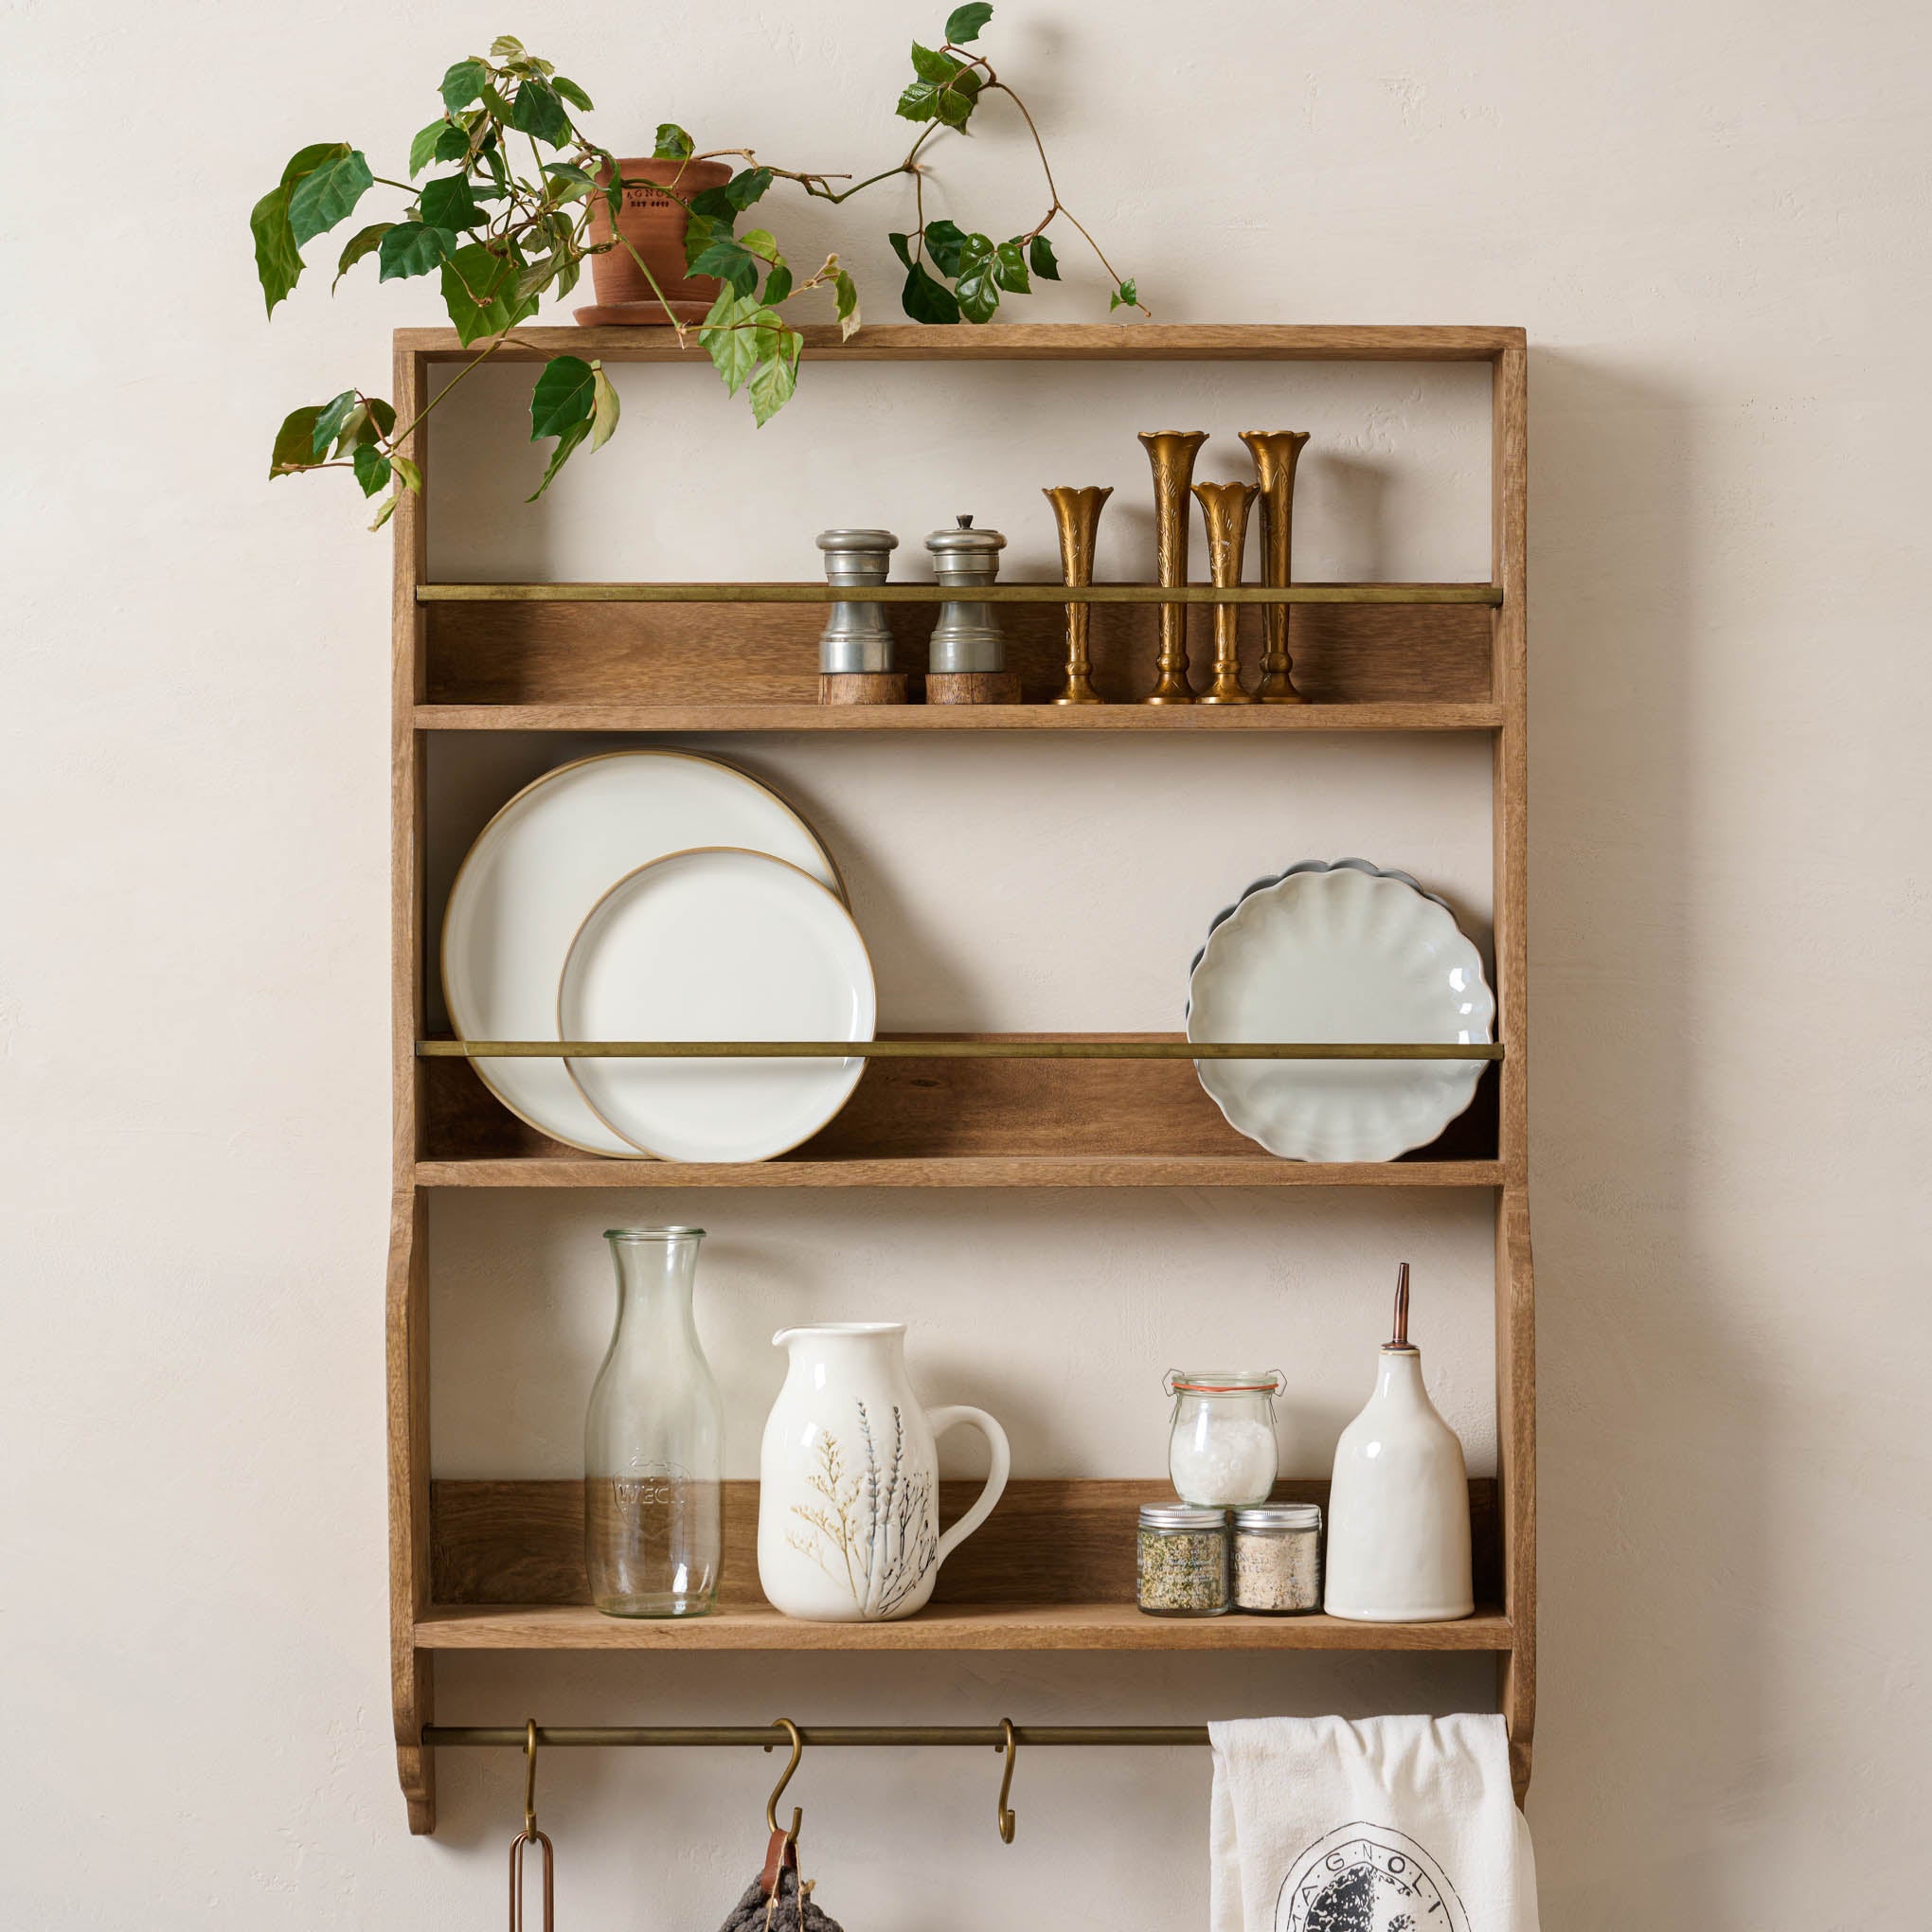 Hannon Wood and Brass Display Shelf with spring kitchen items on shelves $244.00